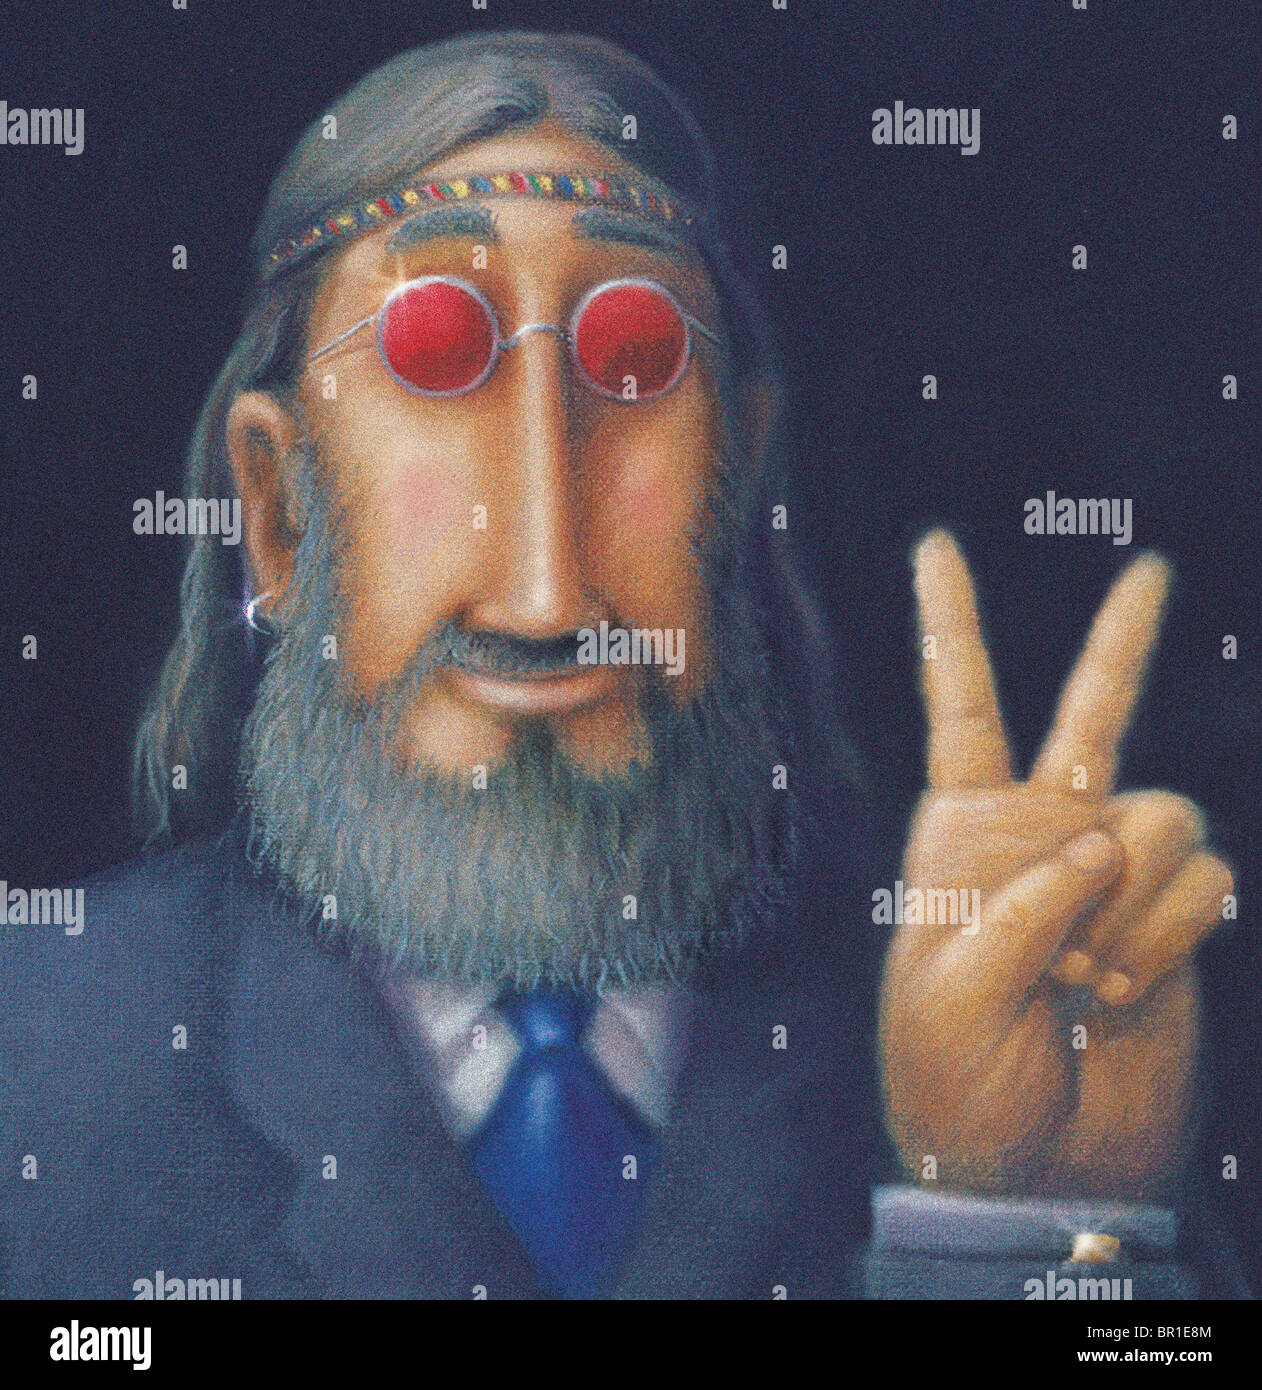 A hippy business man giving the peace sign Stock Photo